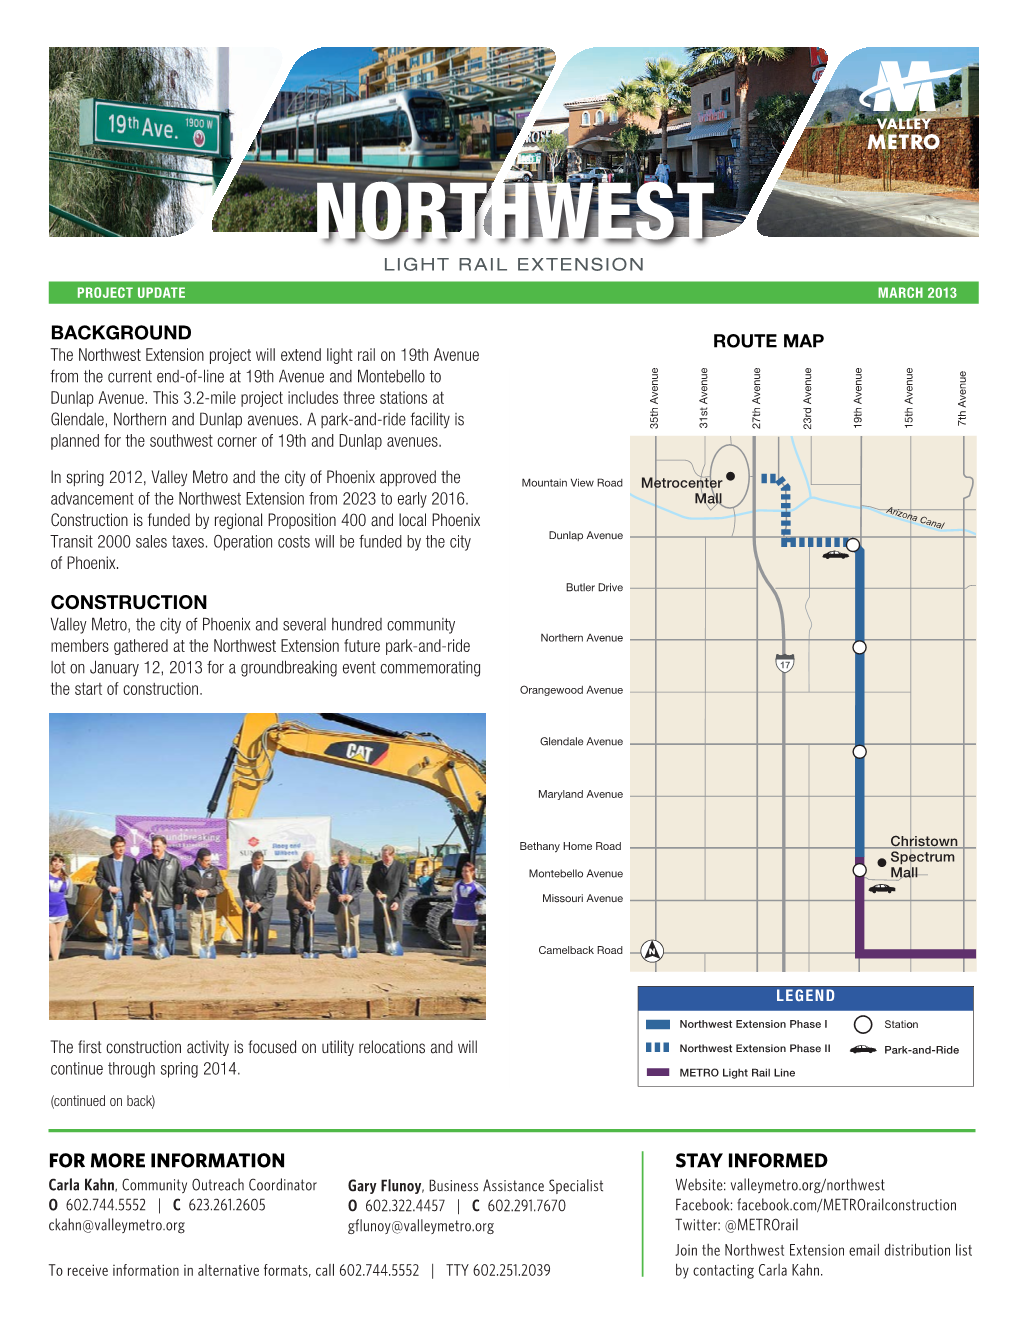 Northwest Light Rail Extension Project Update March 2013